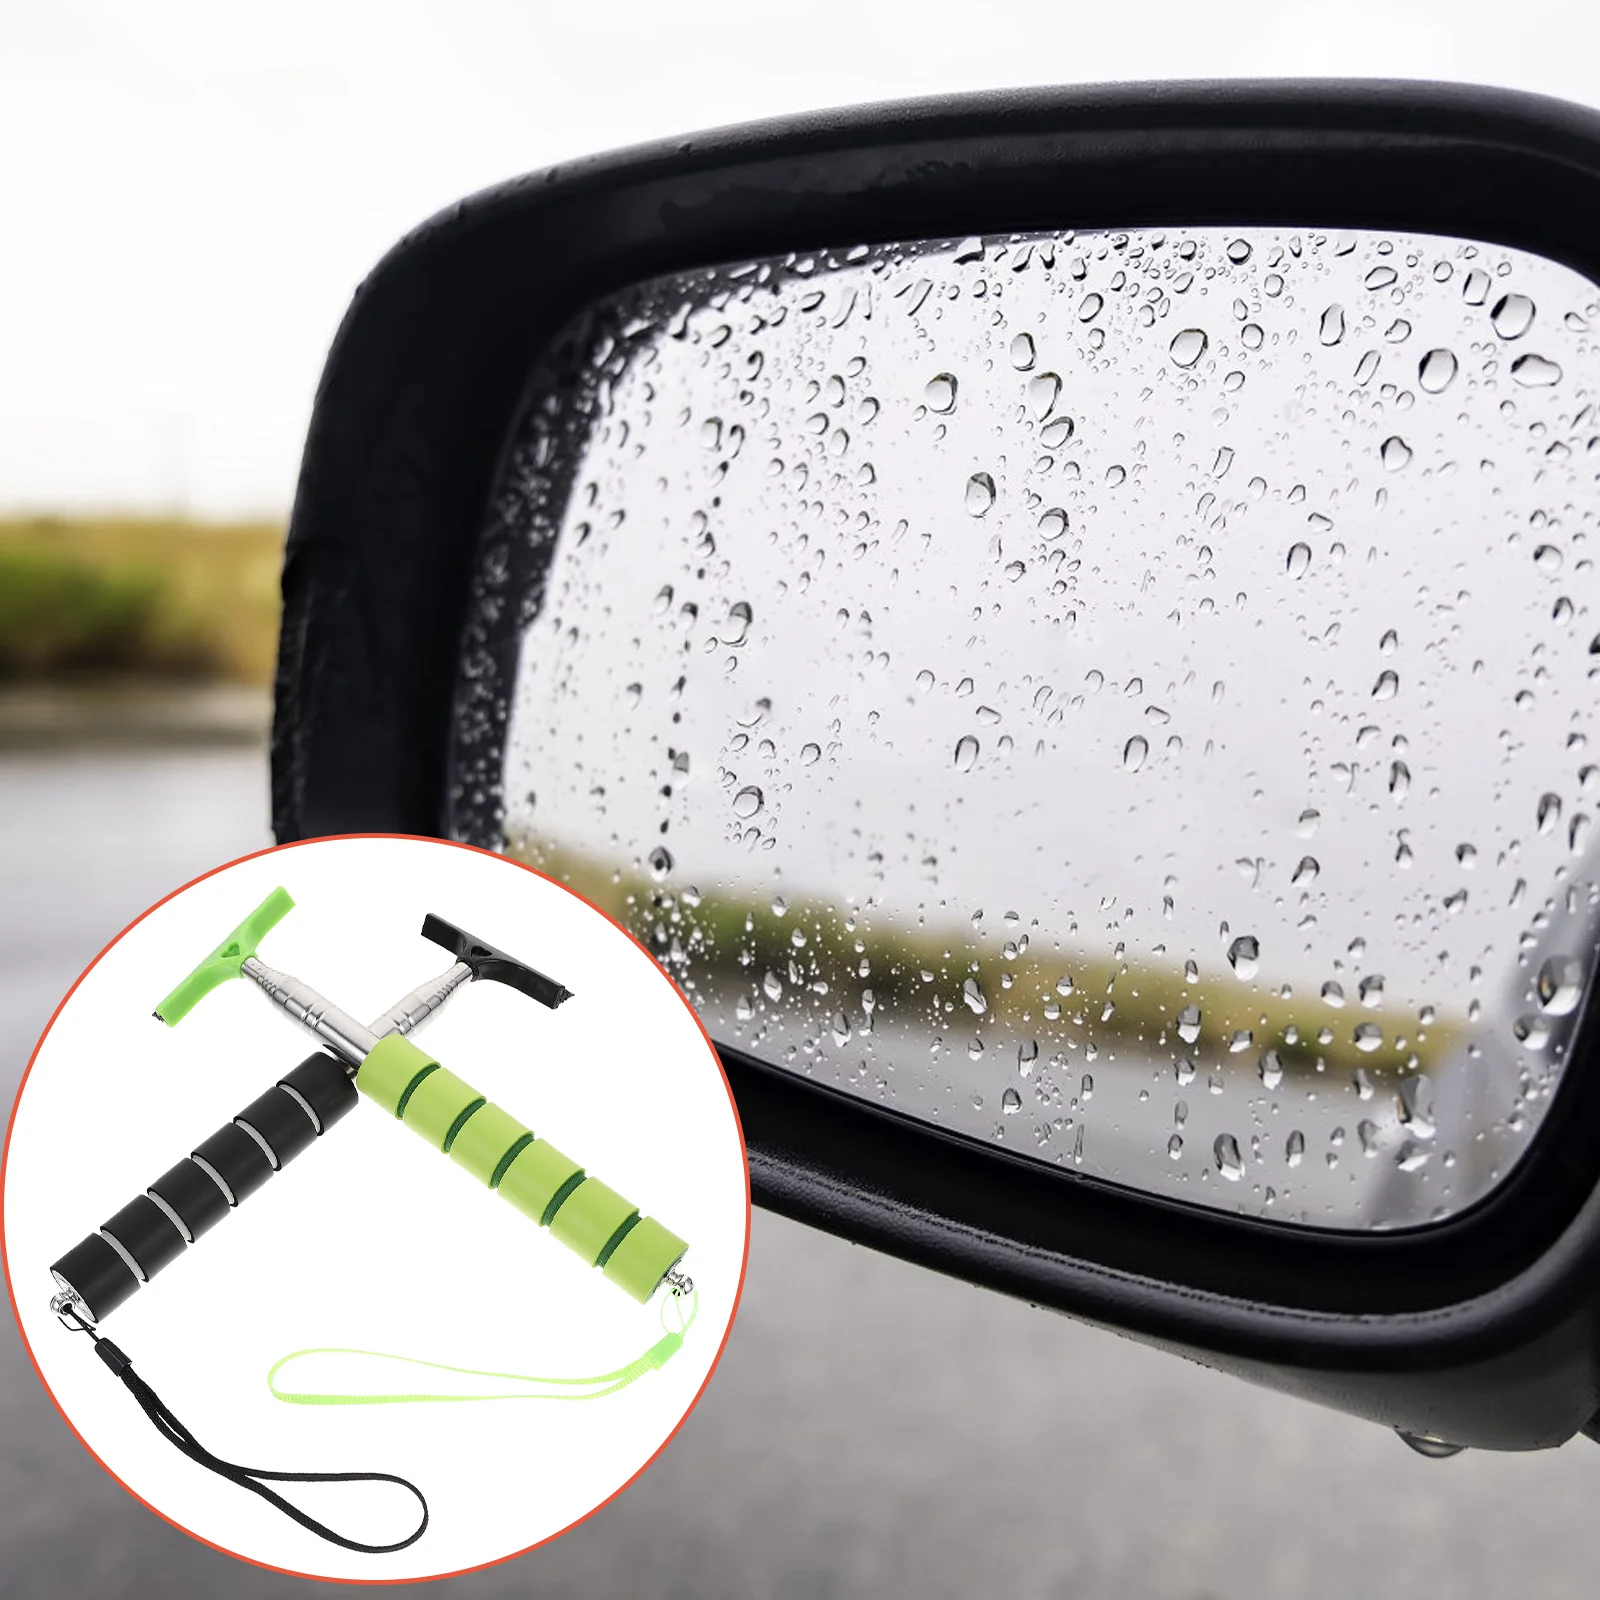 

Car Rearview Mirror Wiper Retractable Side Mirror Squeegee Telescopic Auto Mirror Cleaner Portable Cleaning Tools